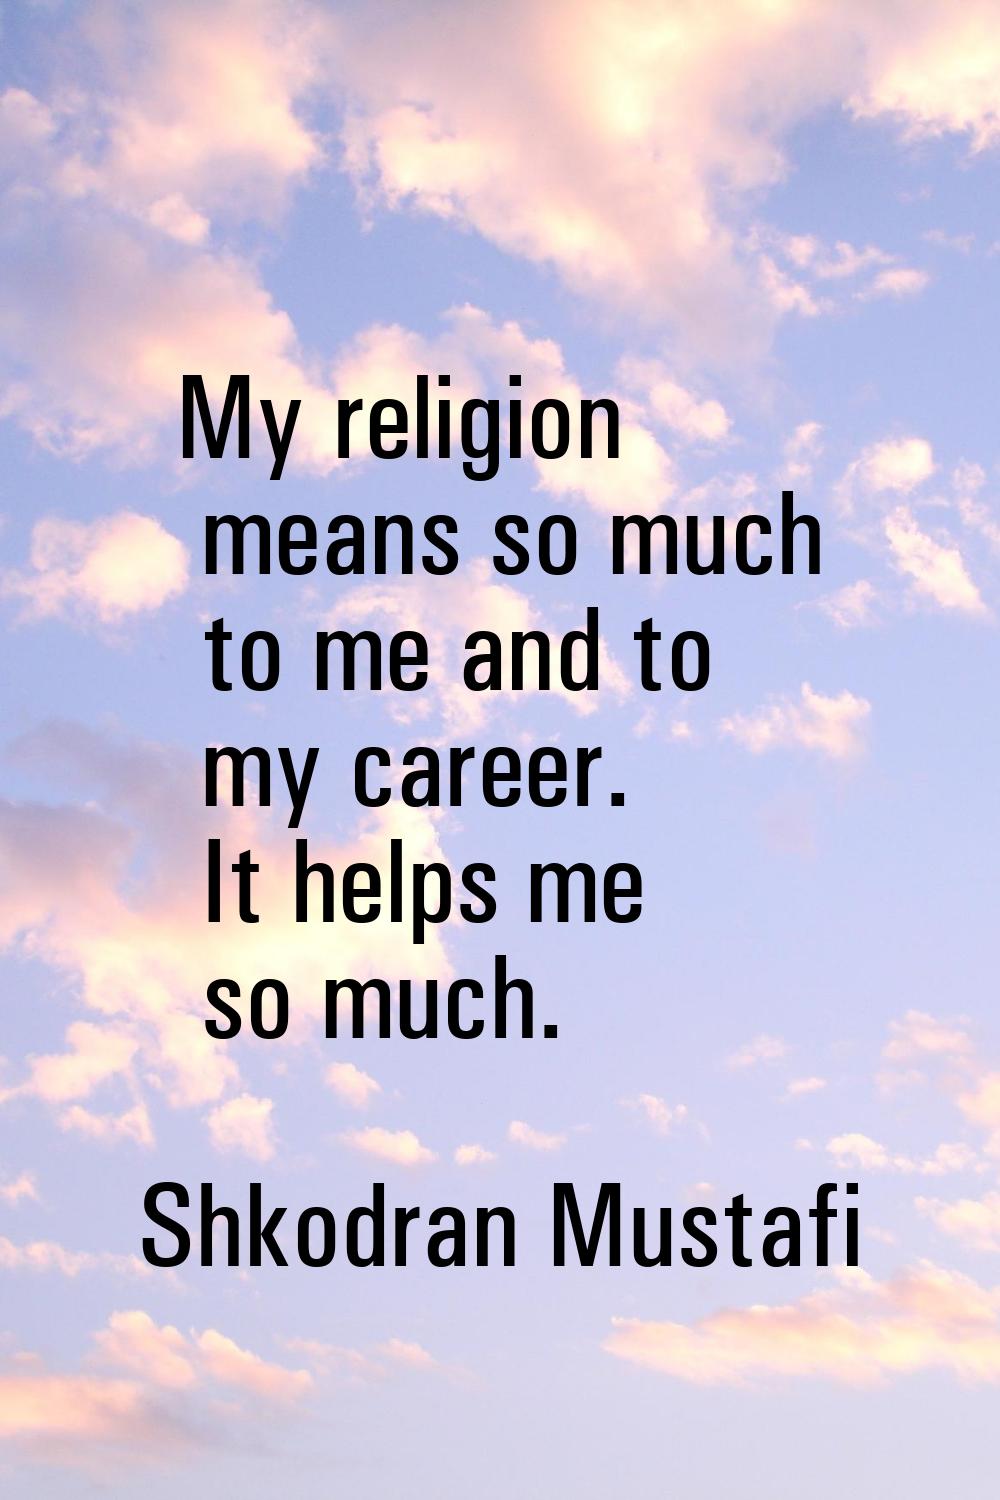 My religion means so much to me and to my career. It helps me so much.